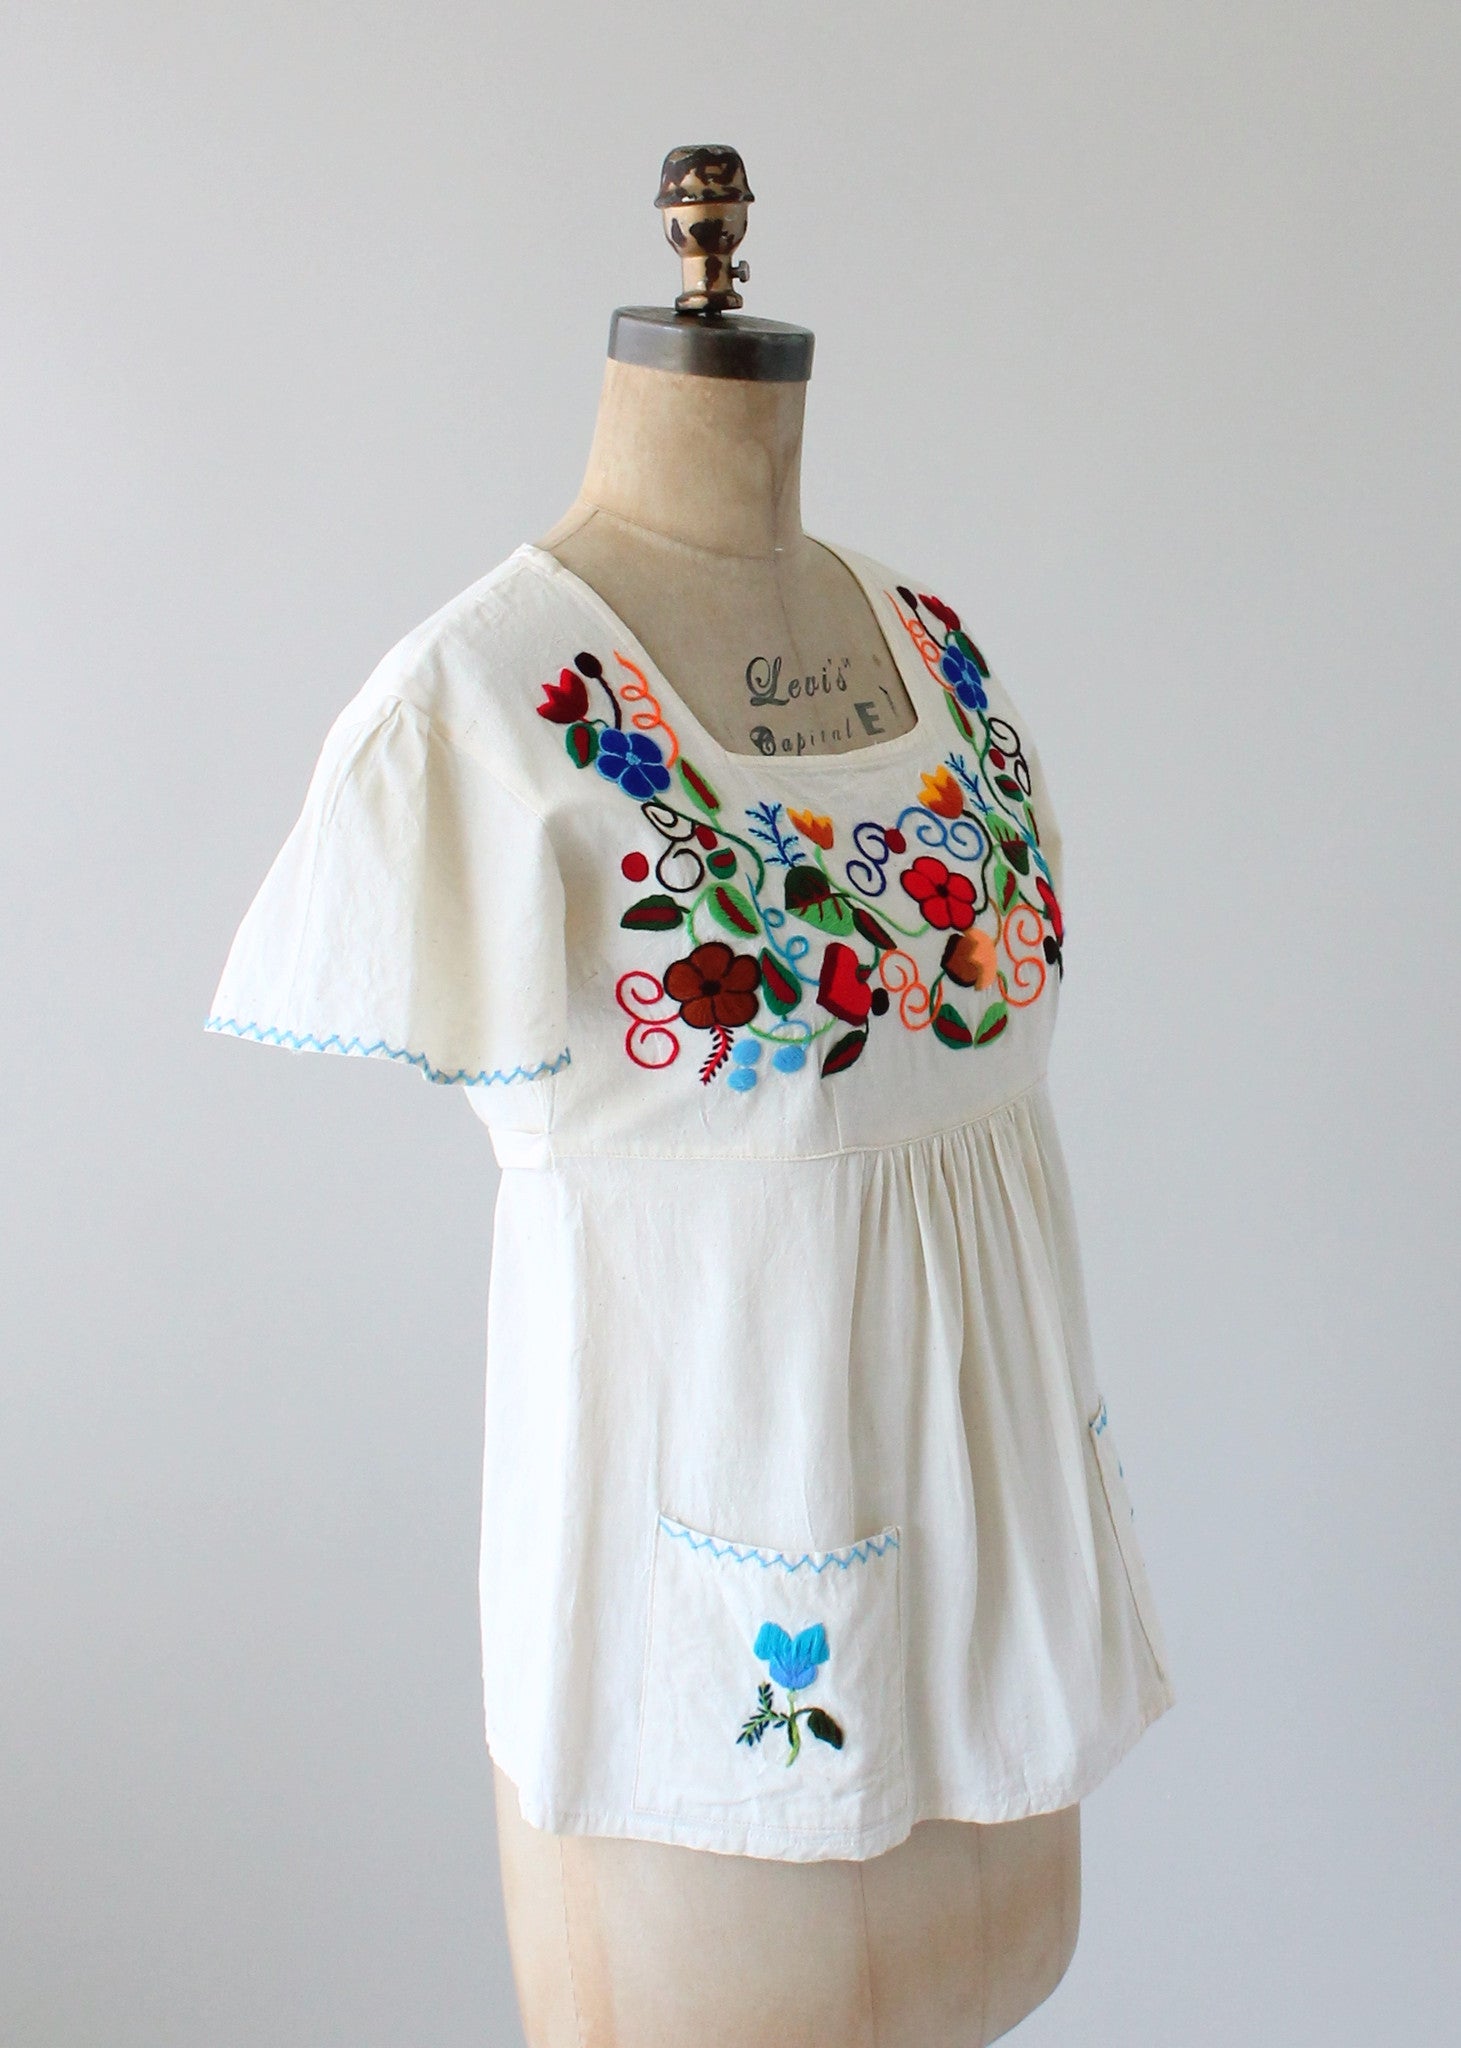 Vintage 1970s Embroidered Cotton Babydoll Shirt - Raleigh Vintage